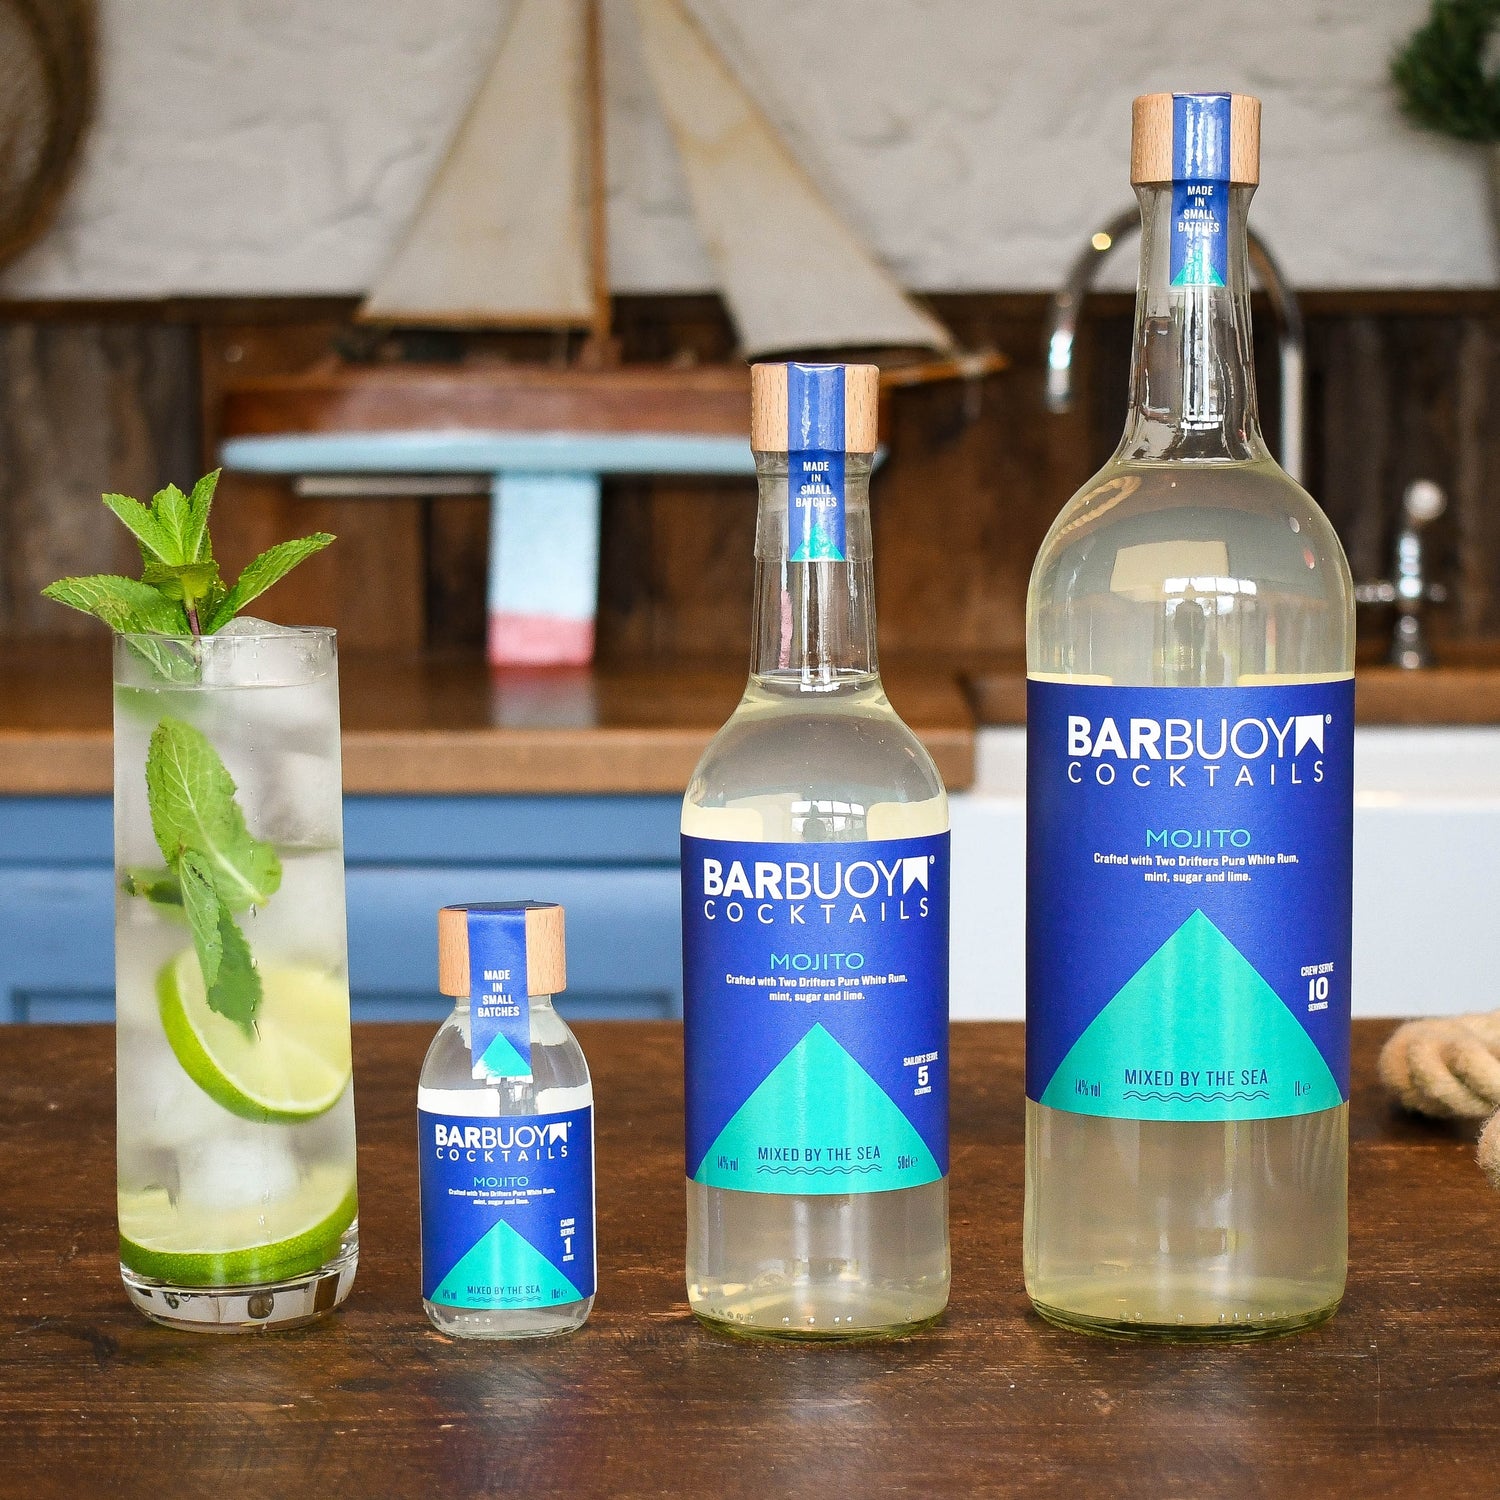 mojito ready made cocktail collection by barbuoy cocktails